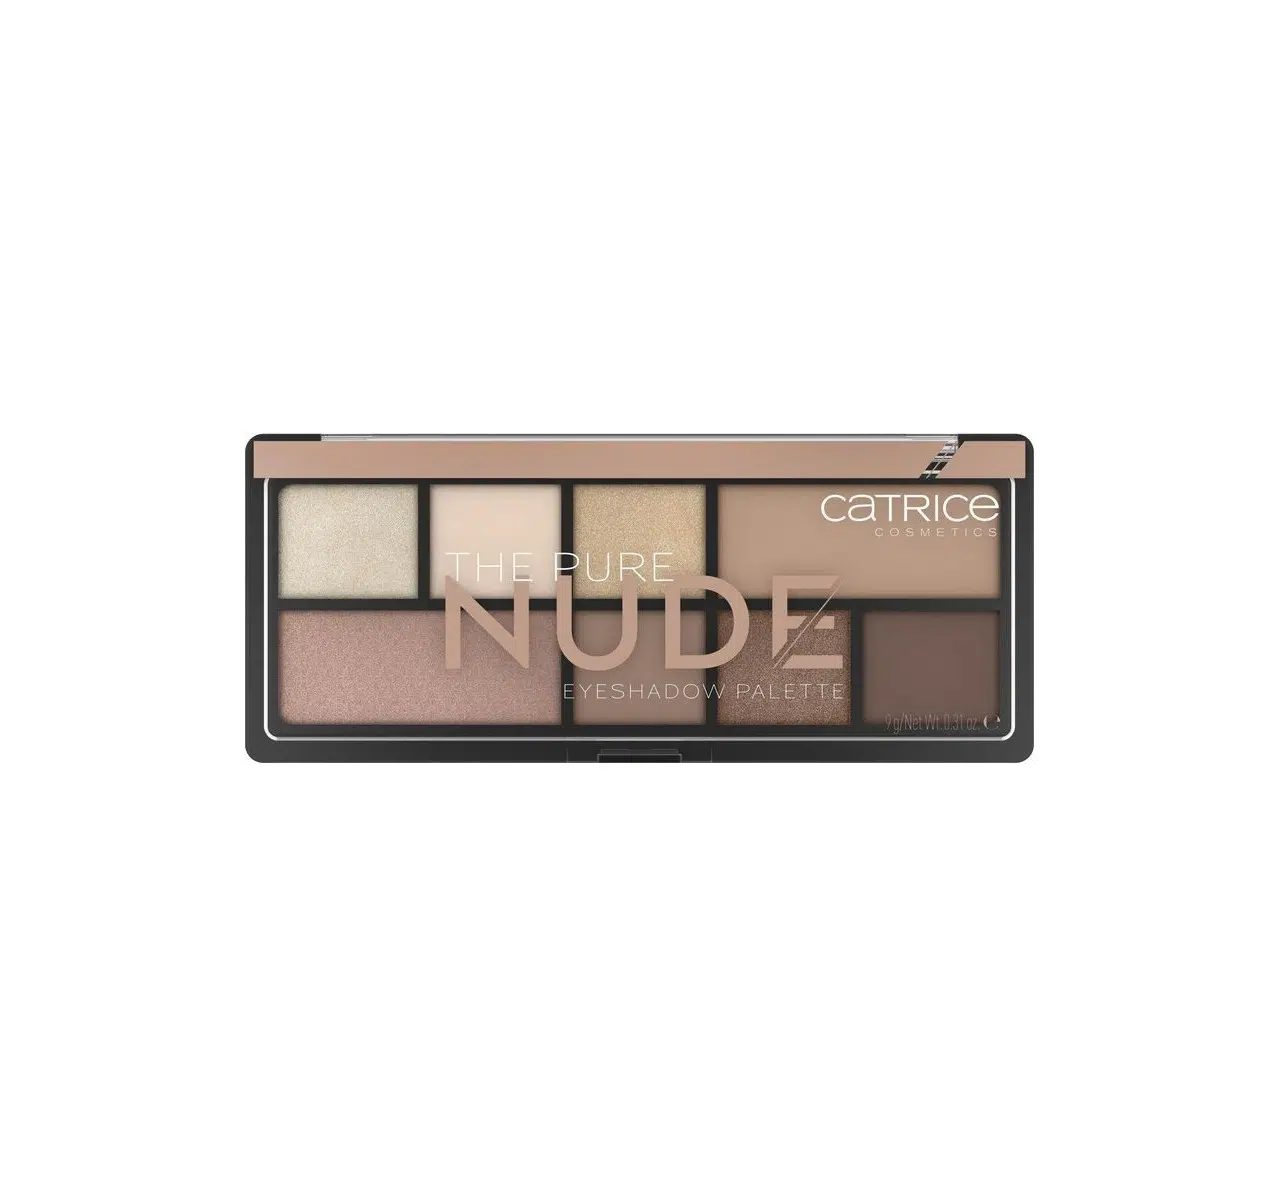 Catrice's Pure Nude Eye Makeup Palette